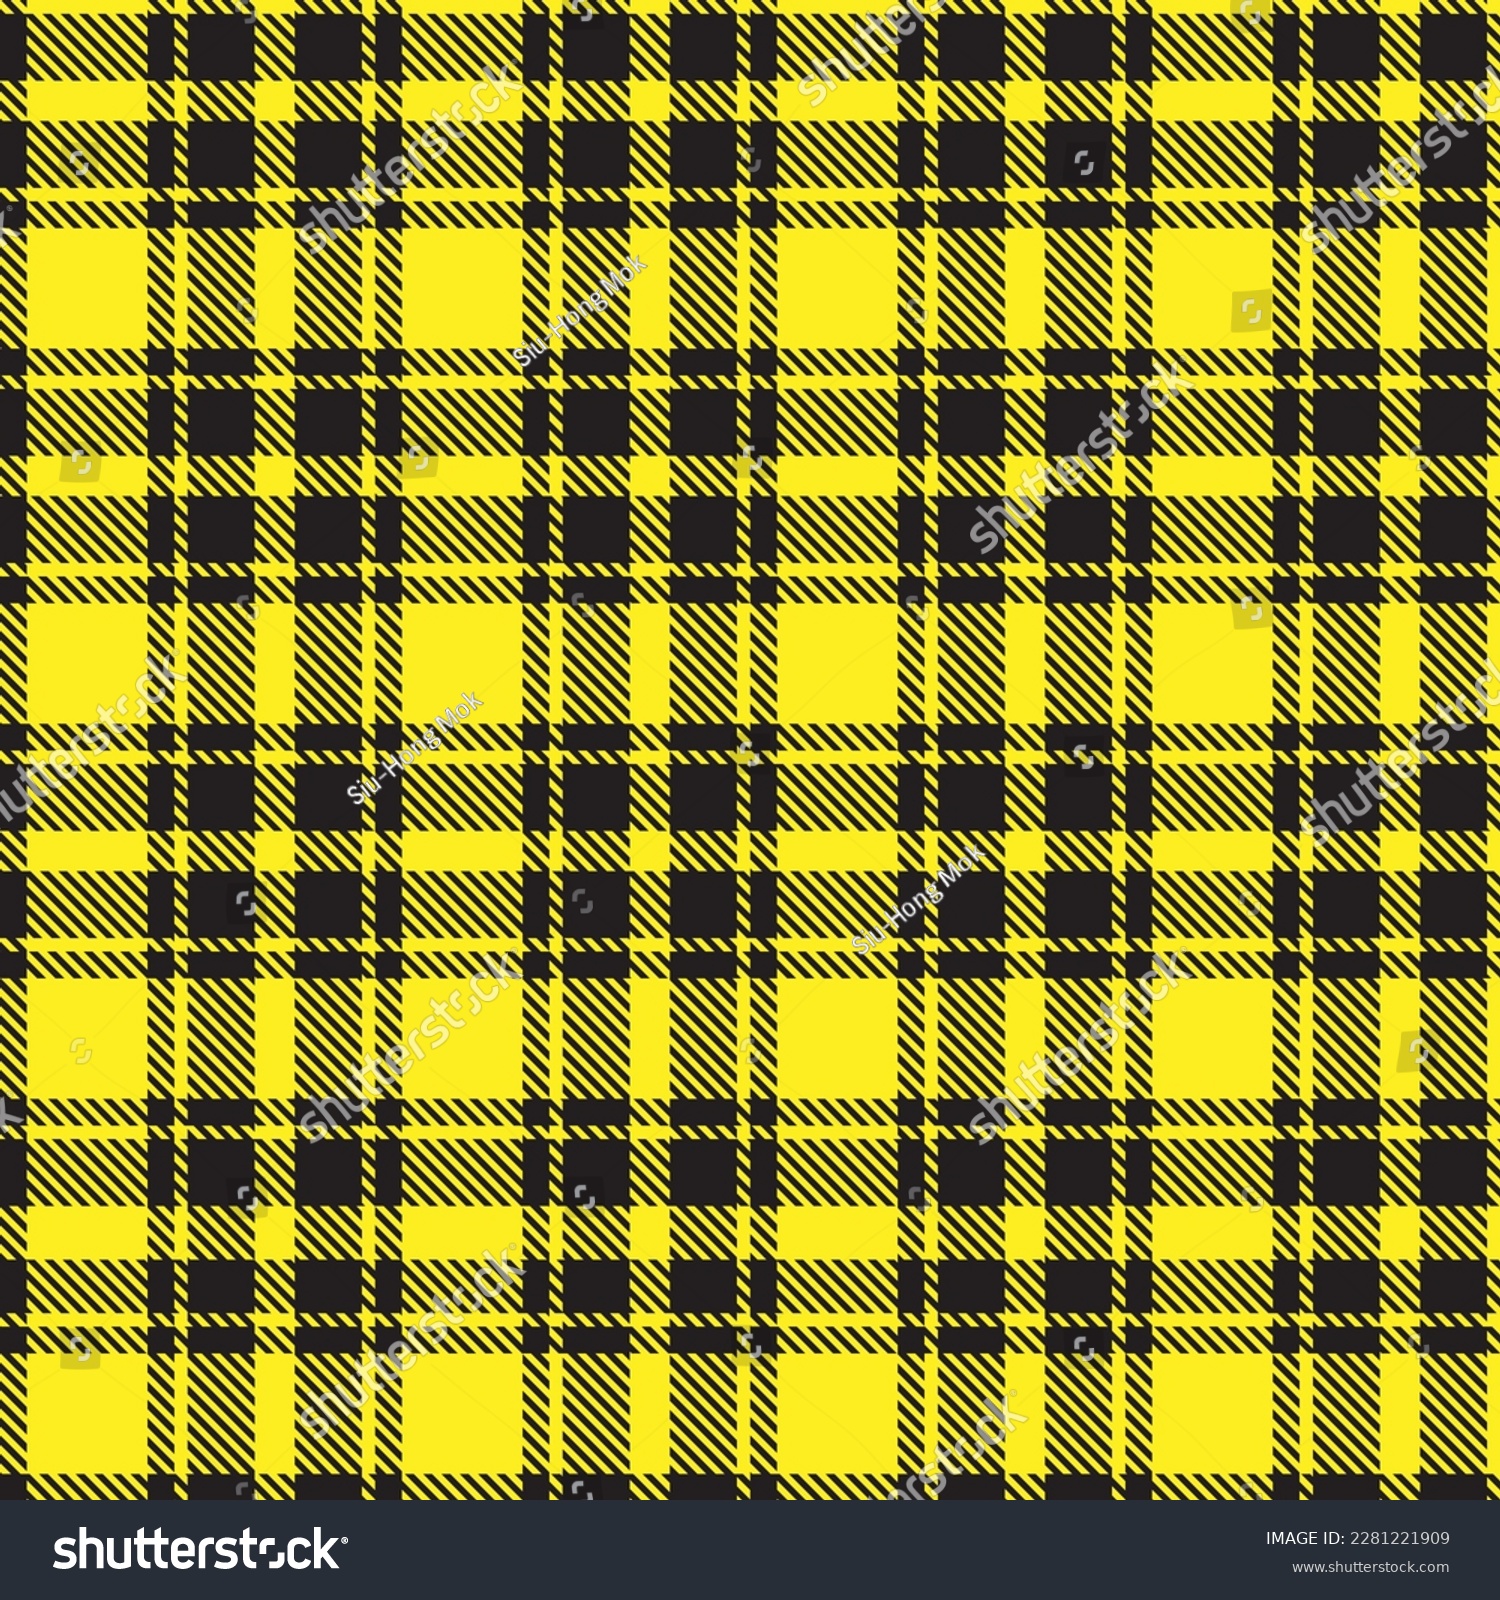 SVG of Colourful Classic Plaid textured seamless pattern for fashion textiles and graphics svg